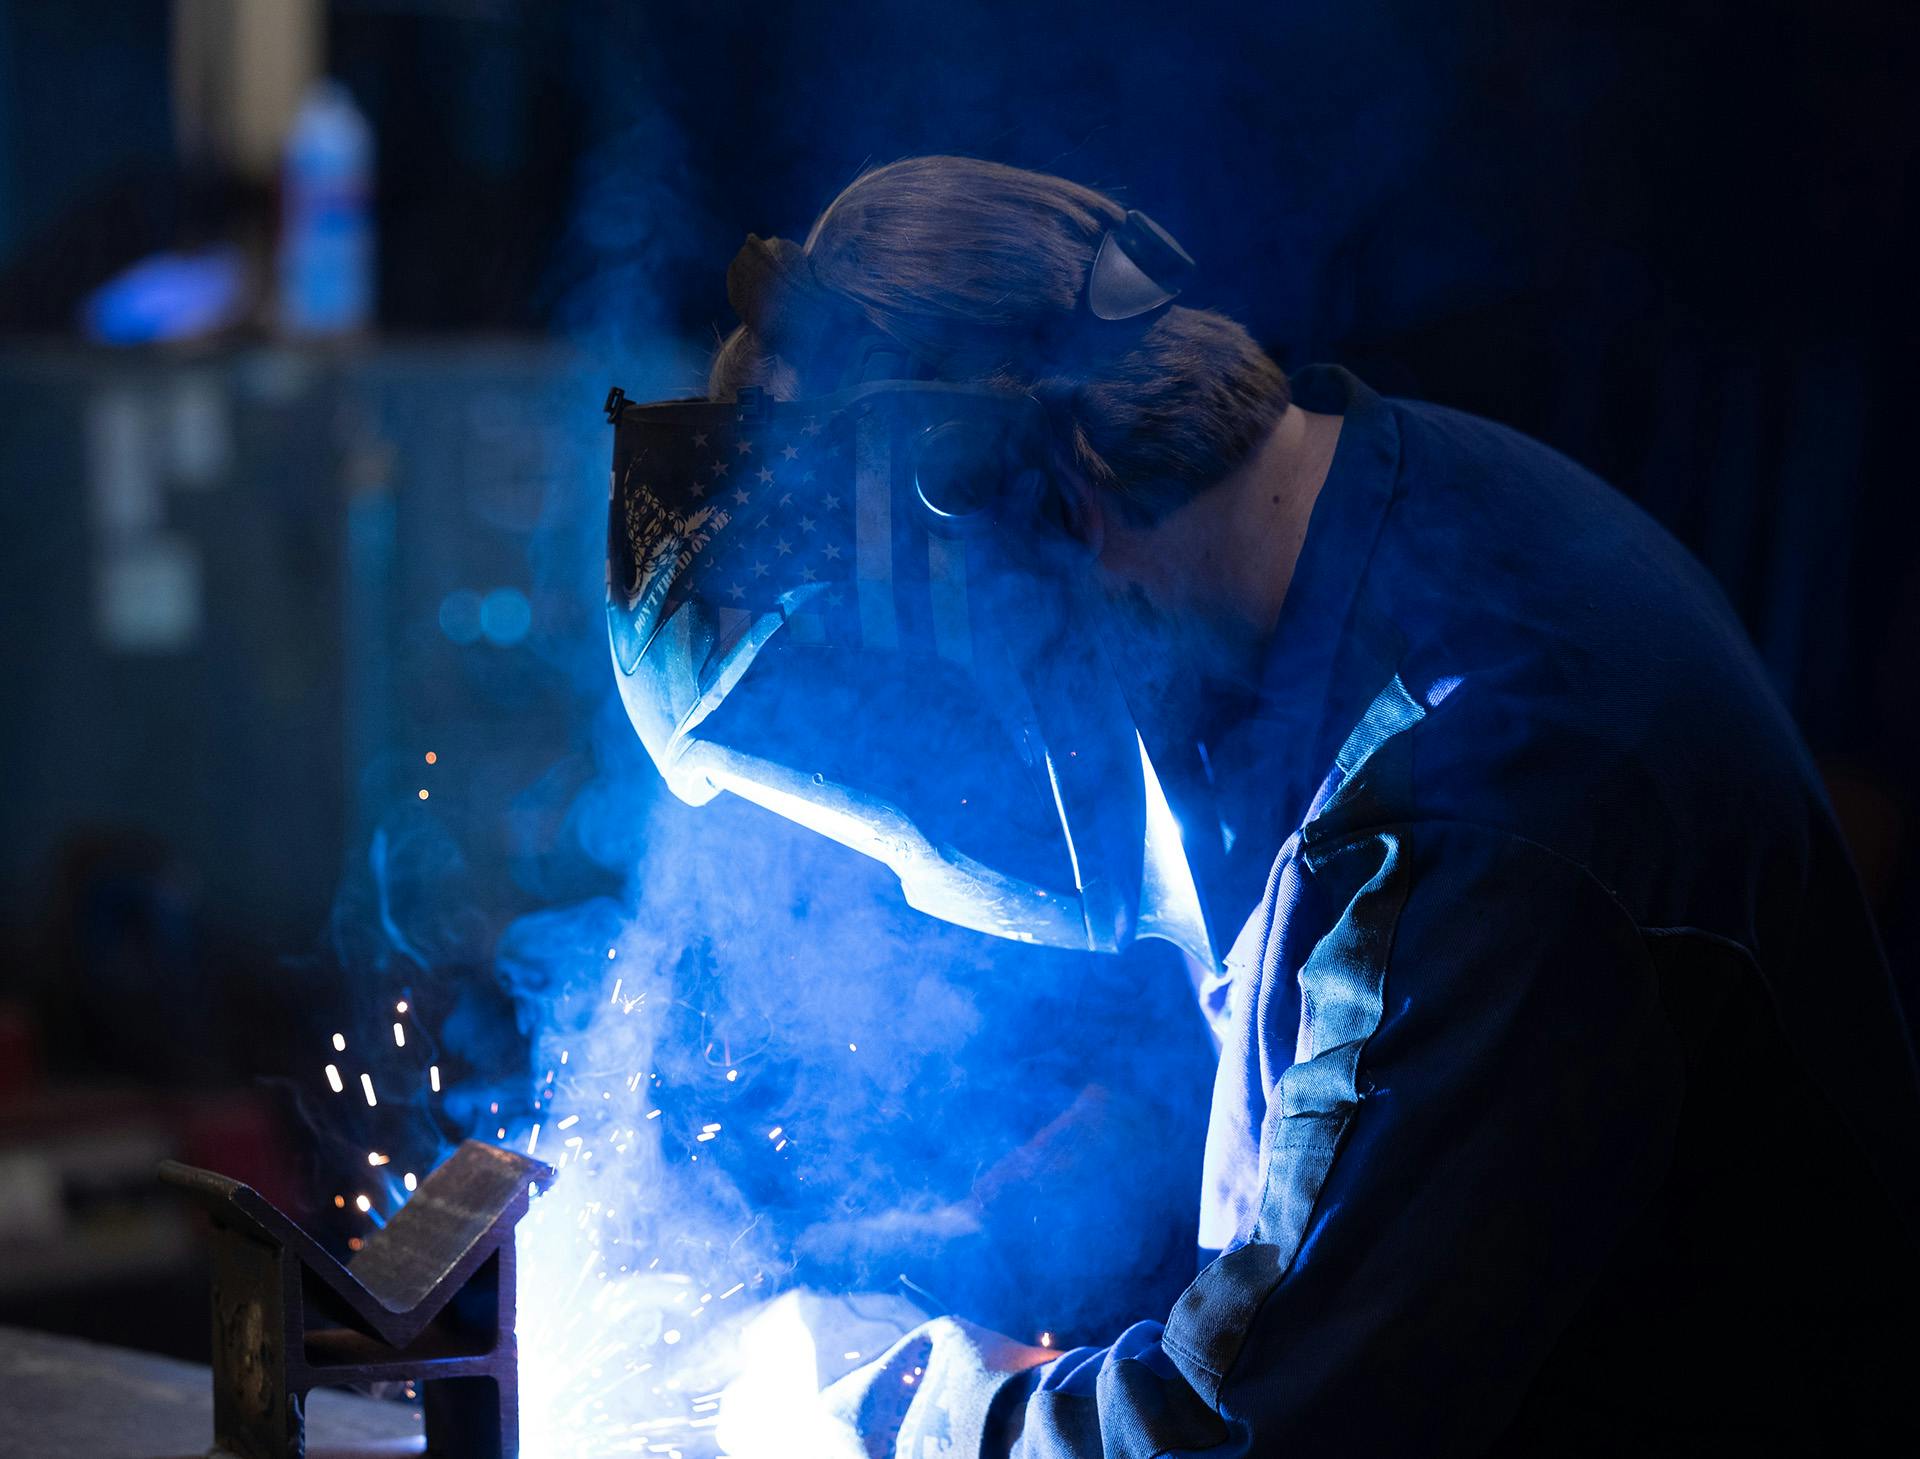 Engineer wearing protective helmet and mask while welding a product